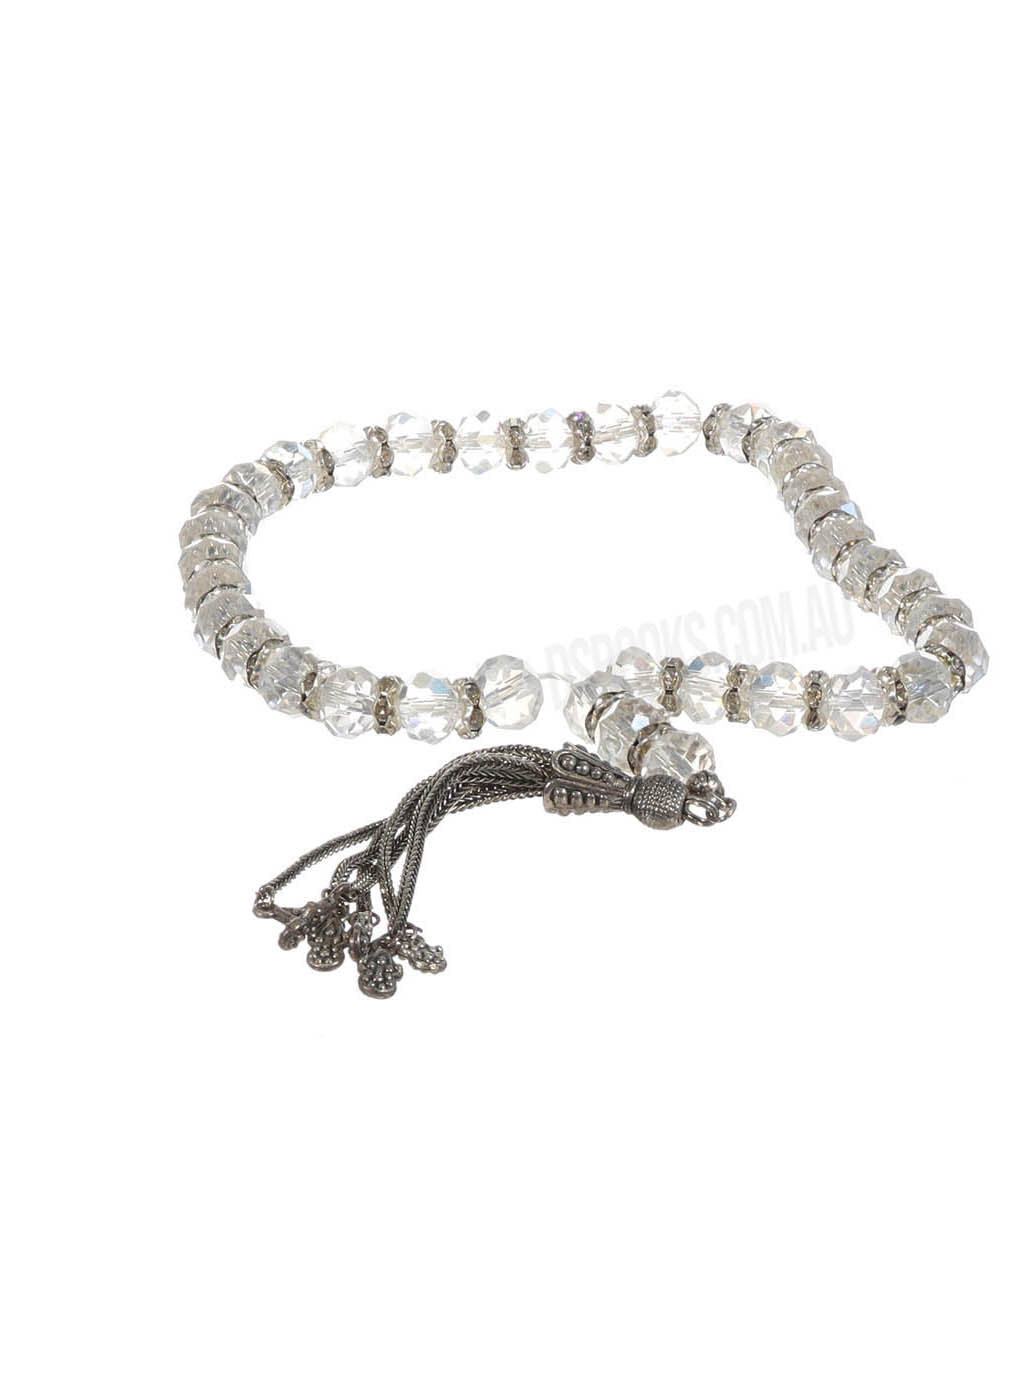 Deluxe Clear Crystal and Silver Tasbih